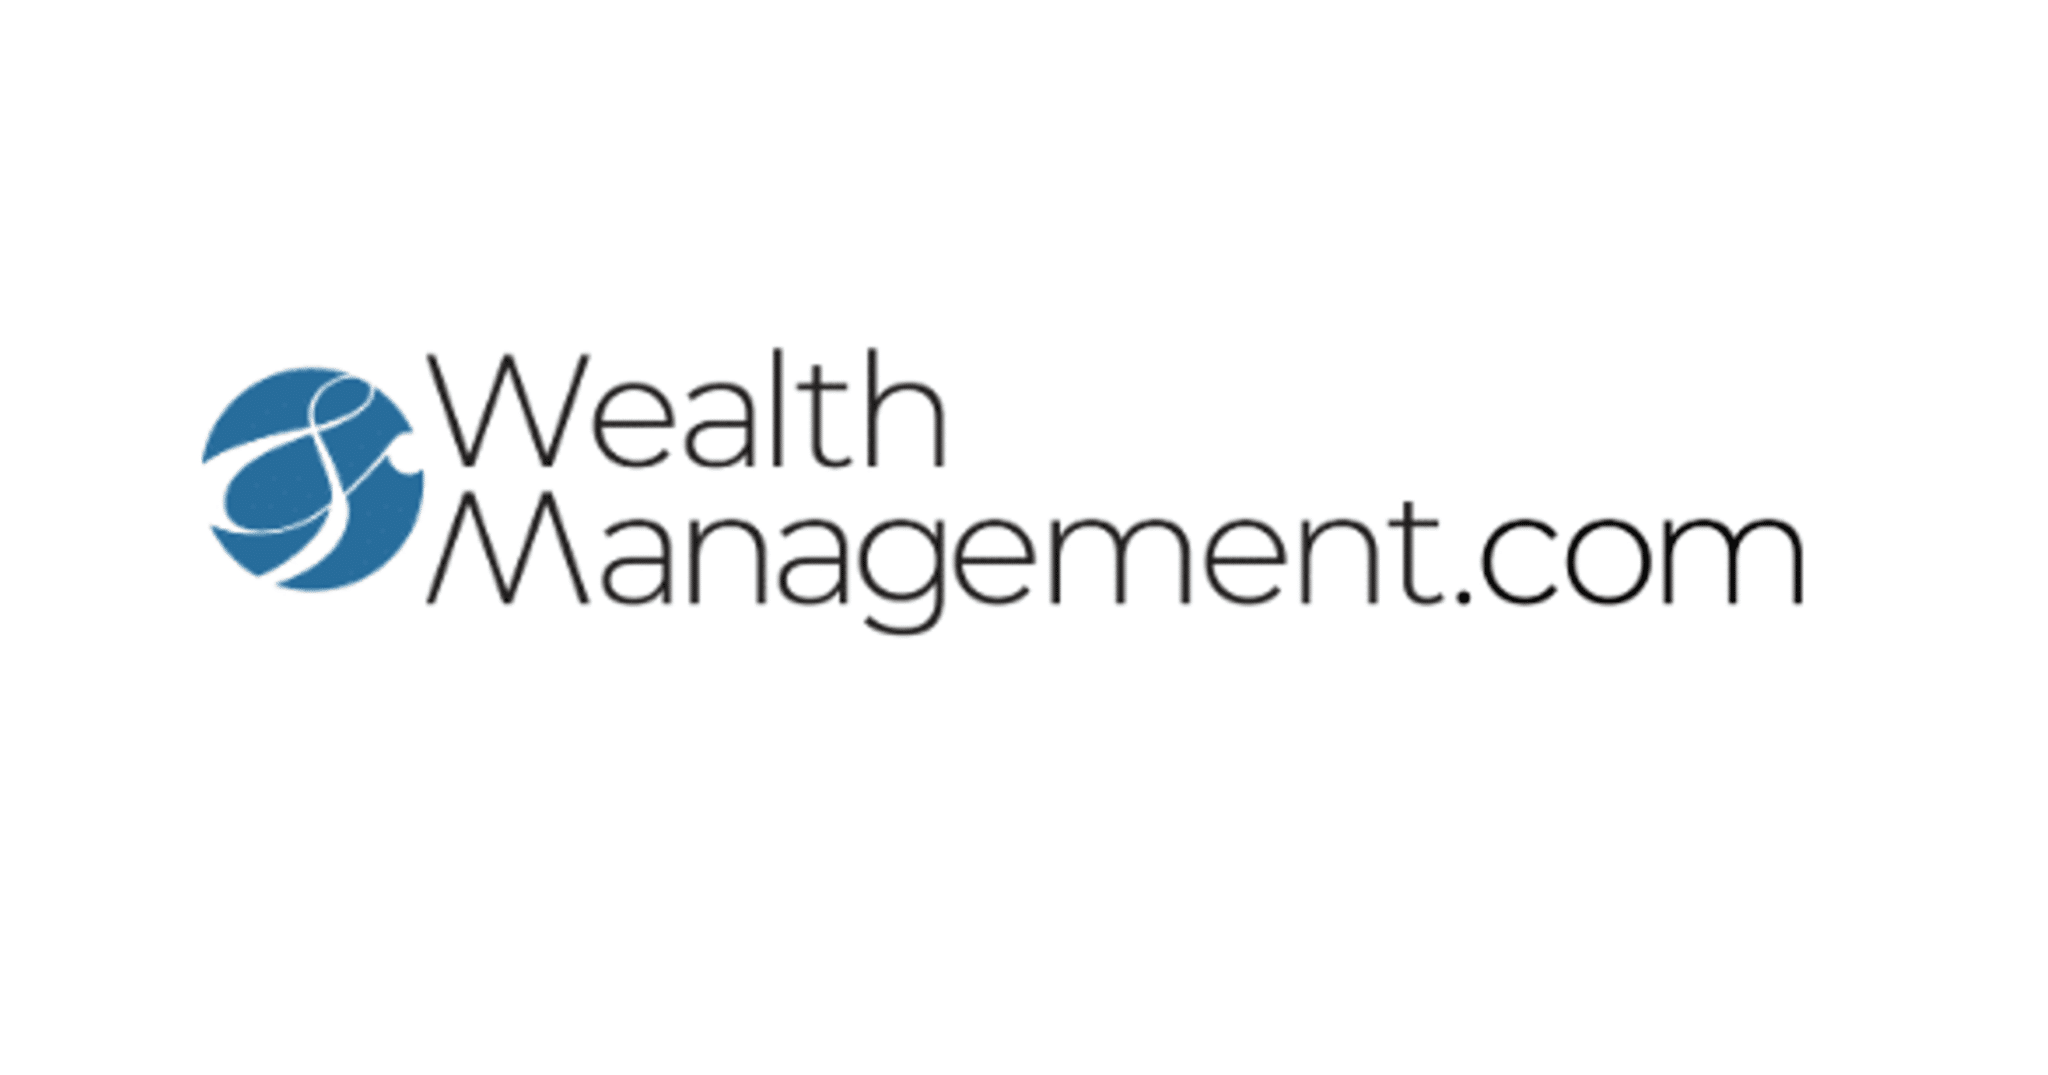 WealthManagement.com: Concurrent Shifts Into ‘Growth Mode’ with Four Industry Hires